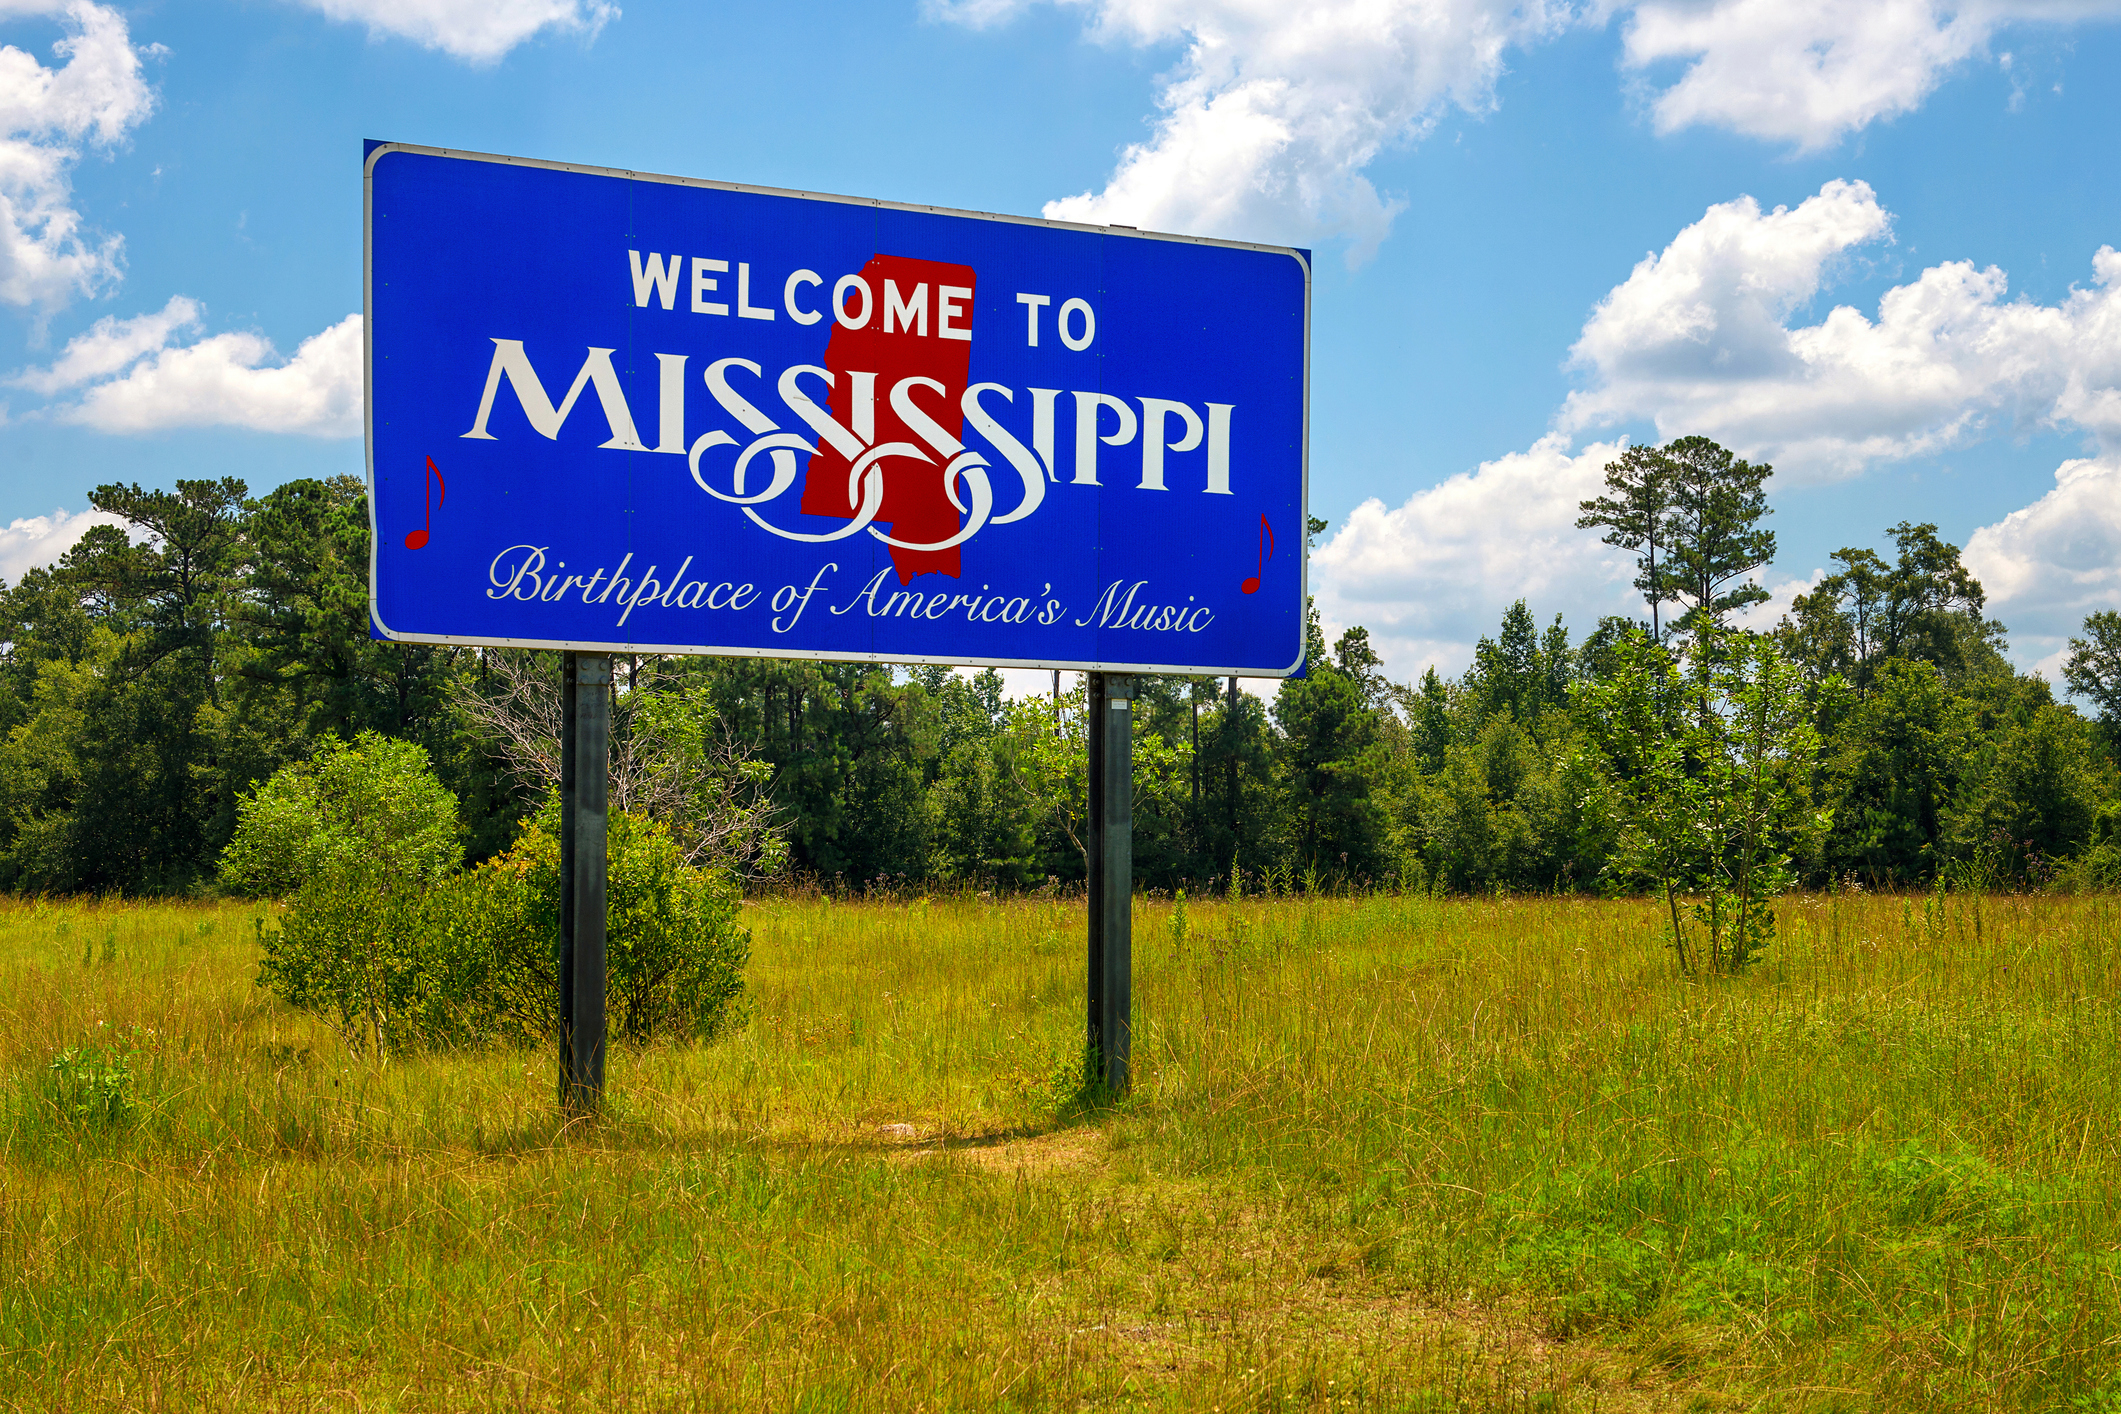 Welcome sign reading &quot;Welcome to Mississippi, Birthplace of America&#x27;s Music&quot; with trees and sky in the background